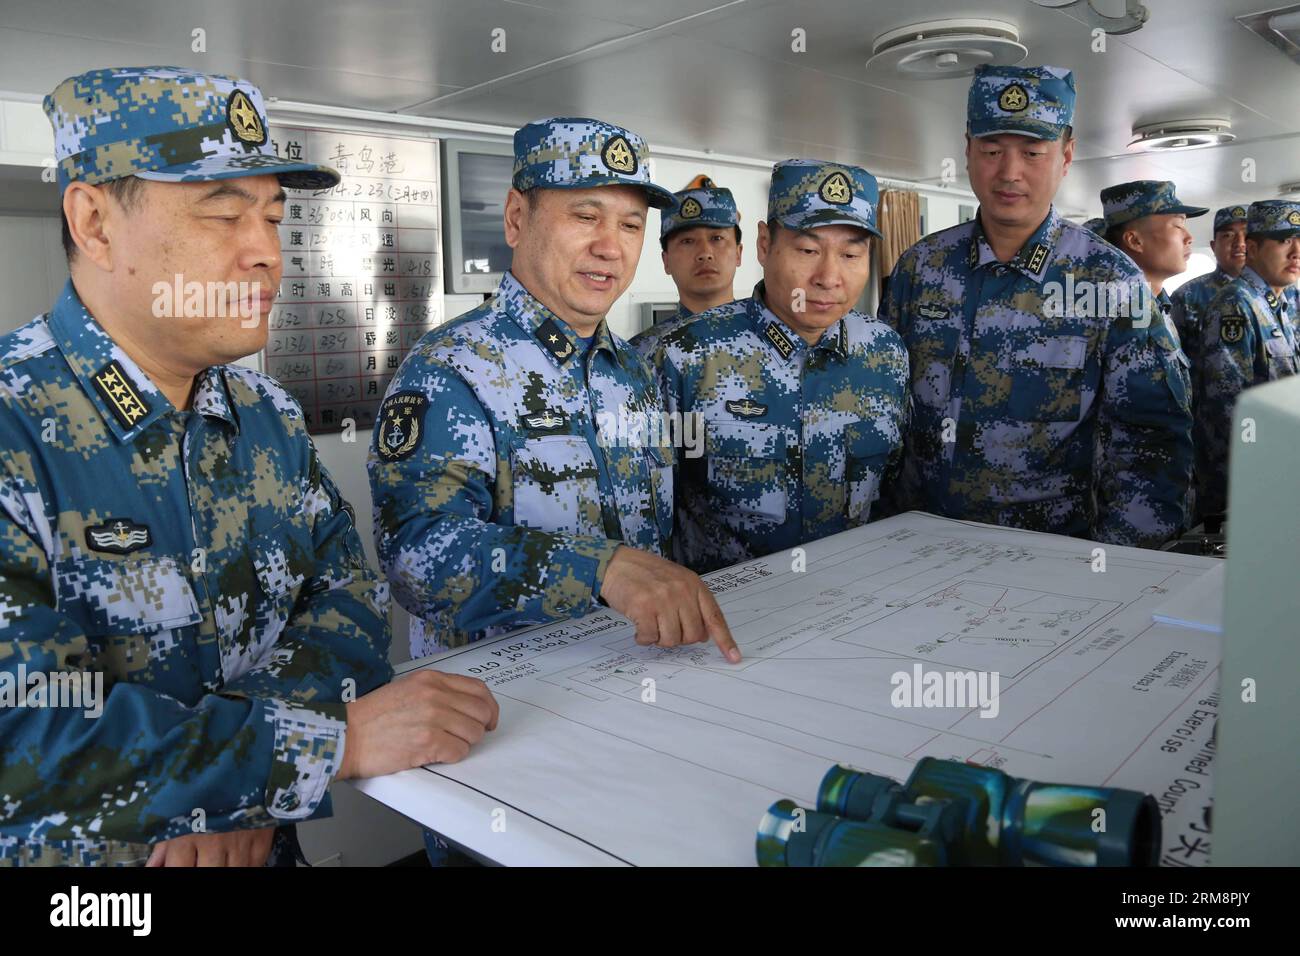 (140423) -- QINGDAO, April 23, 2014 (Xinhua) -- Commanders discuss the battle plan on the Chinese destroyer Harbin during the multi-country maritime exercises off the coast of Qingdao, east China s Shandong Province, April 23, 2014. Nineteen ships, seven helicopters and marine corps from eight countries including China, Bangladesh, Pakistan, Singapore, Indonesia, India, Malaysia and Brunei were organized into three task forces to conduct the exercises dubbed Maritime Cooperation - 2014 . (Xinhua/Wang Jianmin) (mp) CHINA-QINGDAO-MULTI-COUNTRY MARITIME EXERCISES (CN) PUBLICATIONxNOTxINxCHN   Qin Stock Photo